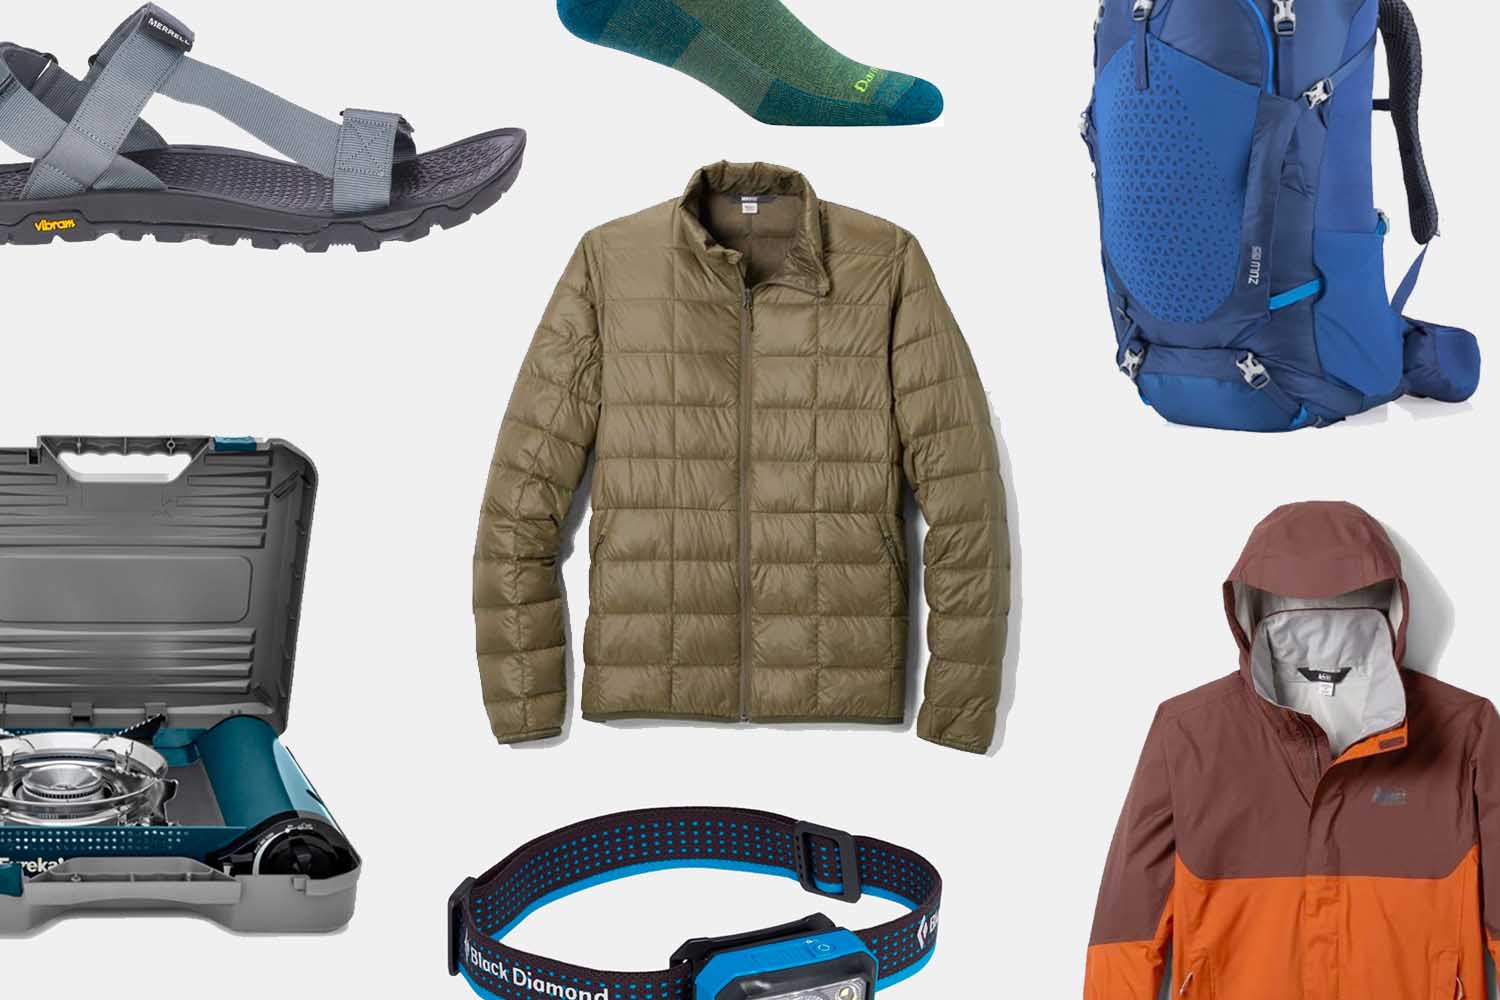 Gear Deals From Stanley, REI, Backcountry, and More